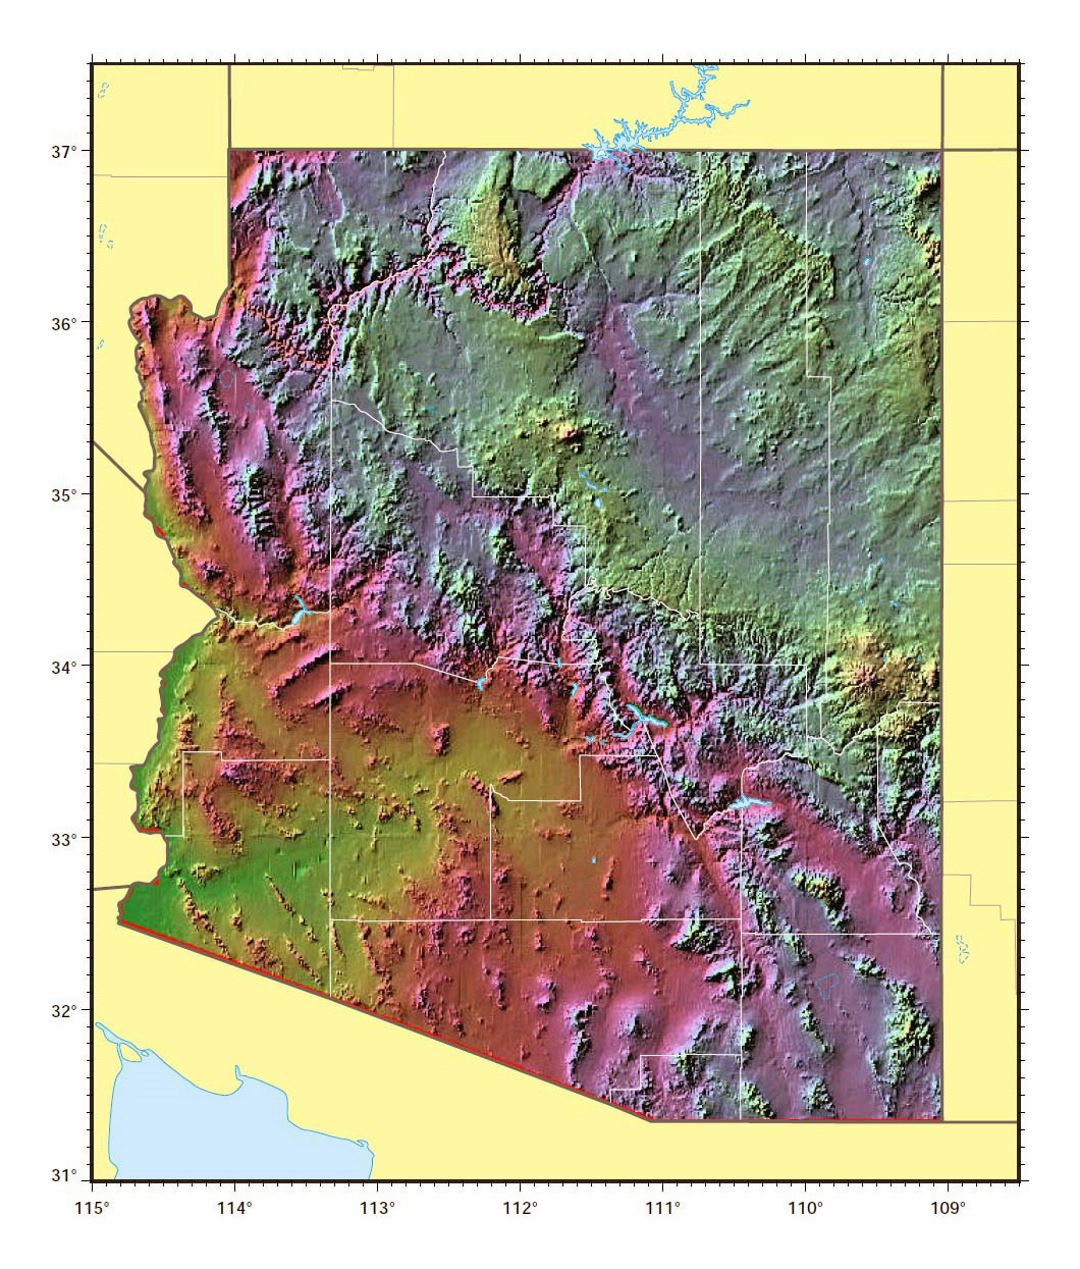 Relief map of Arizona state